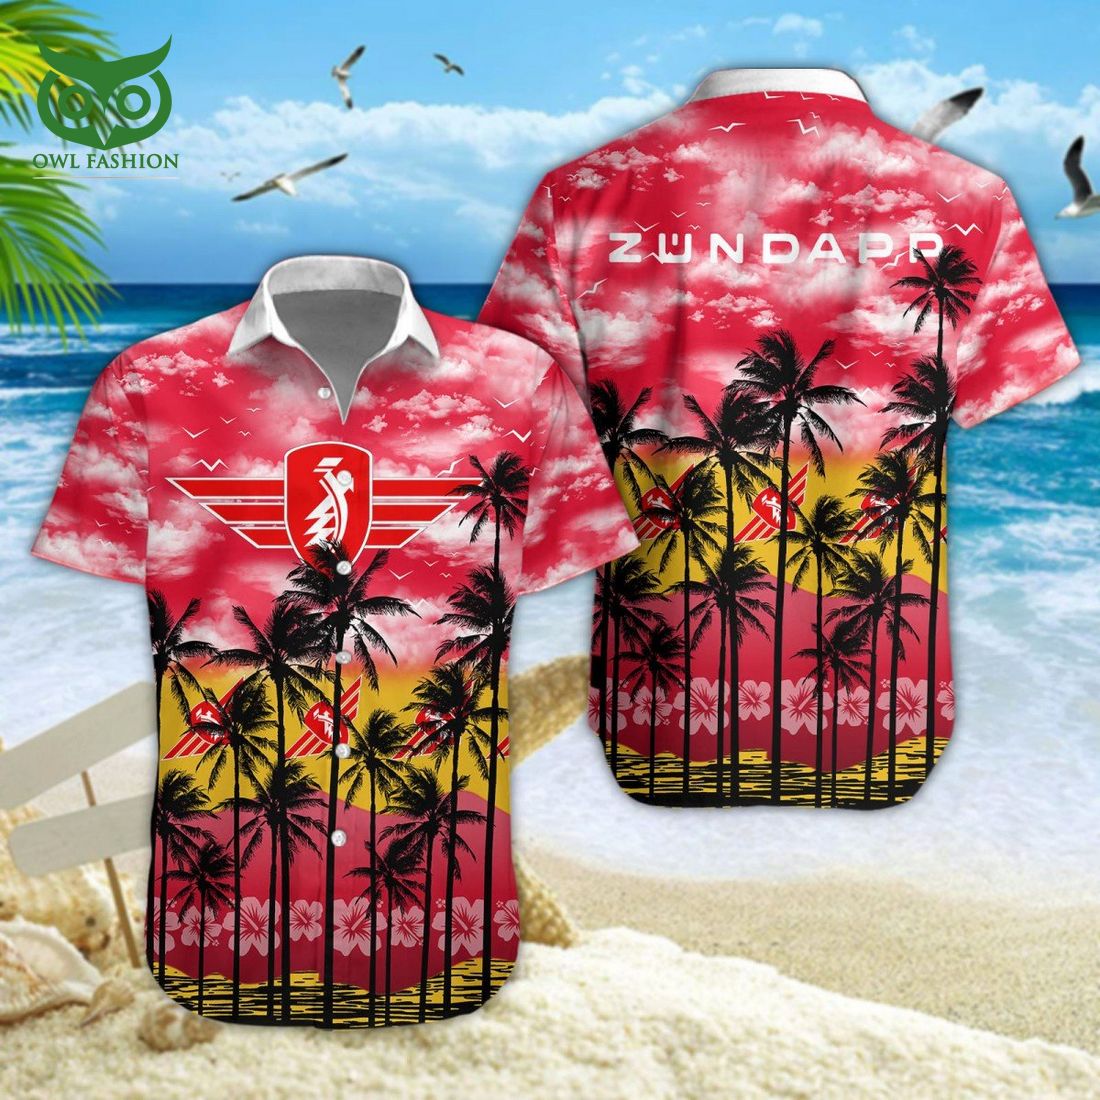 Zundapp Car Hawaiian Shirt Short You are getting me envious with your look